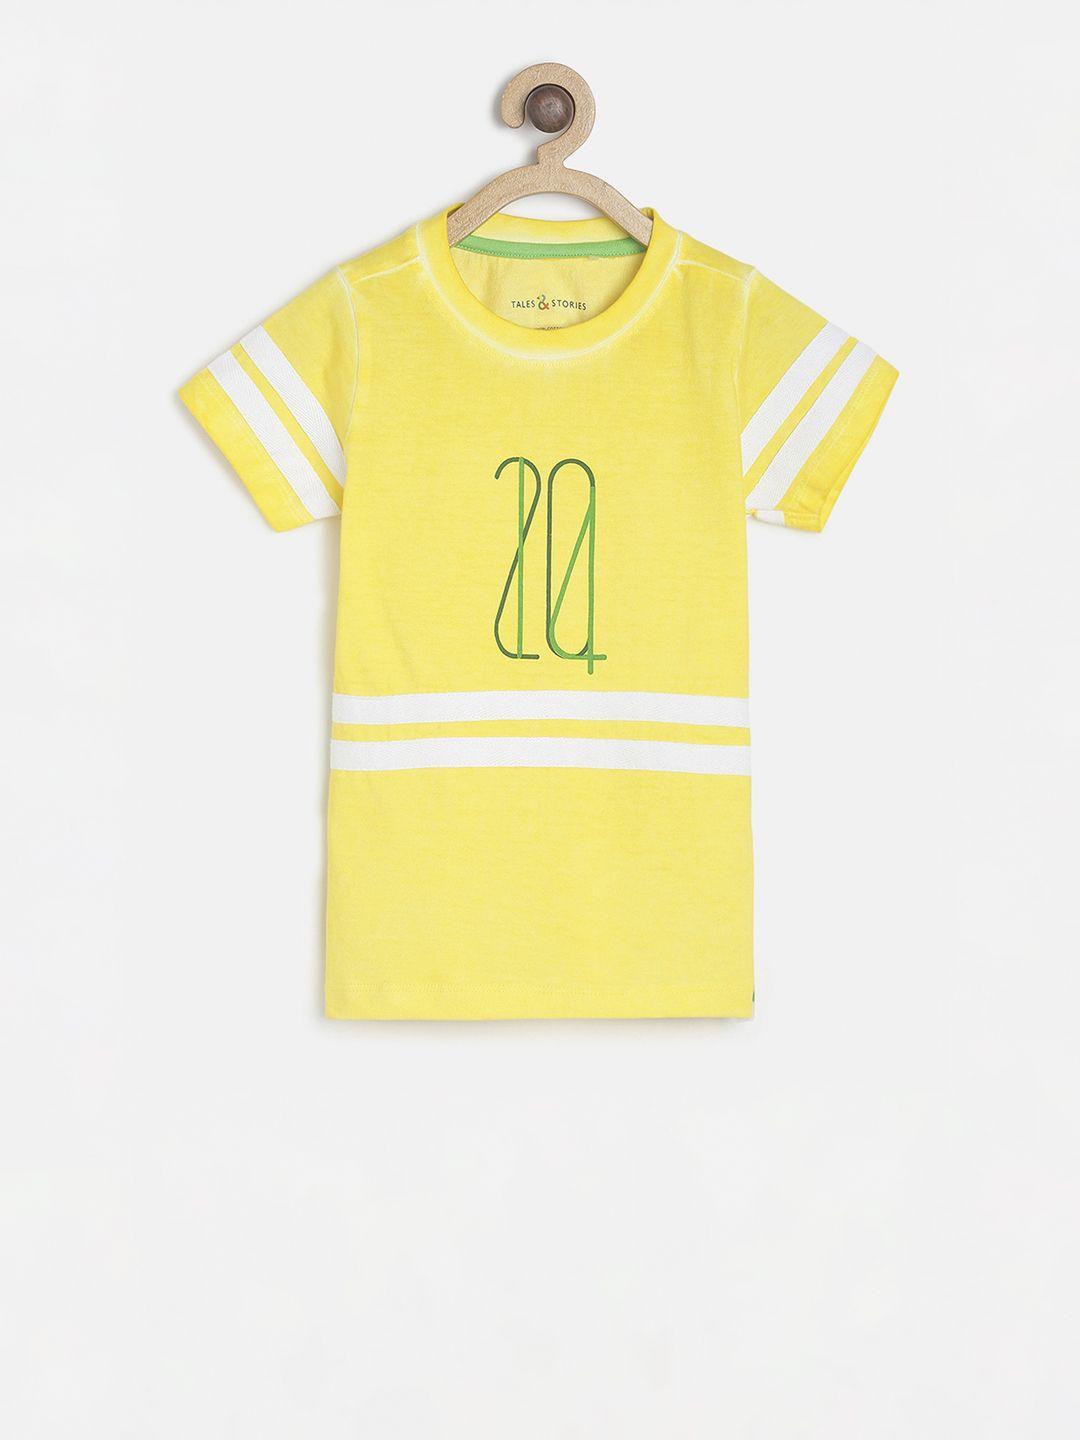 tales & stories boys yellow striped round neck t-shirt